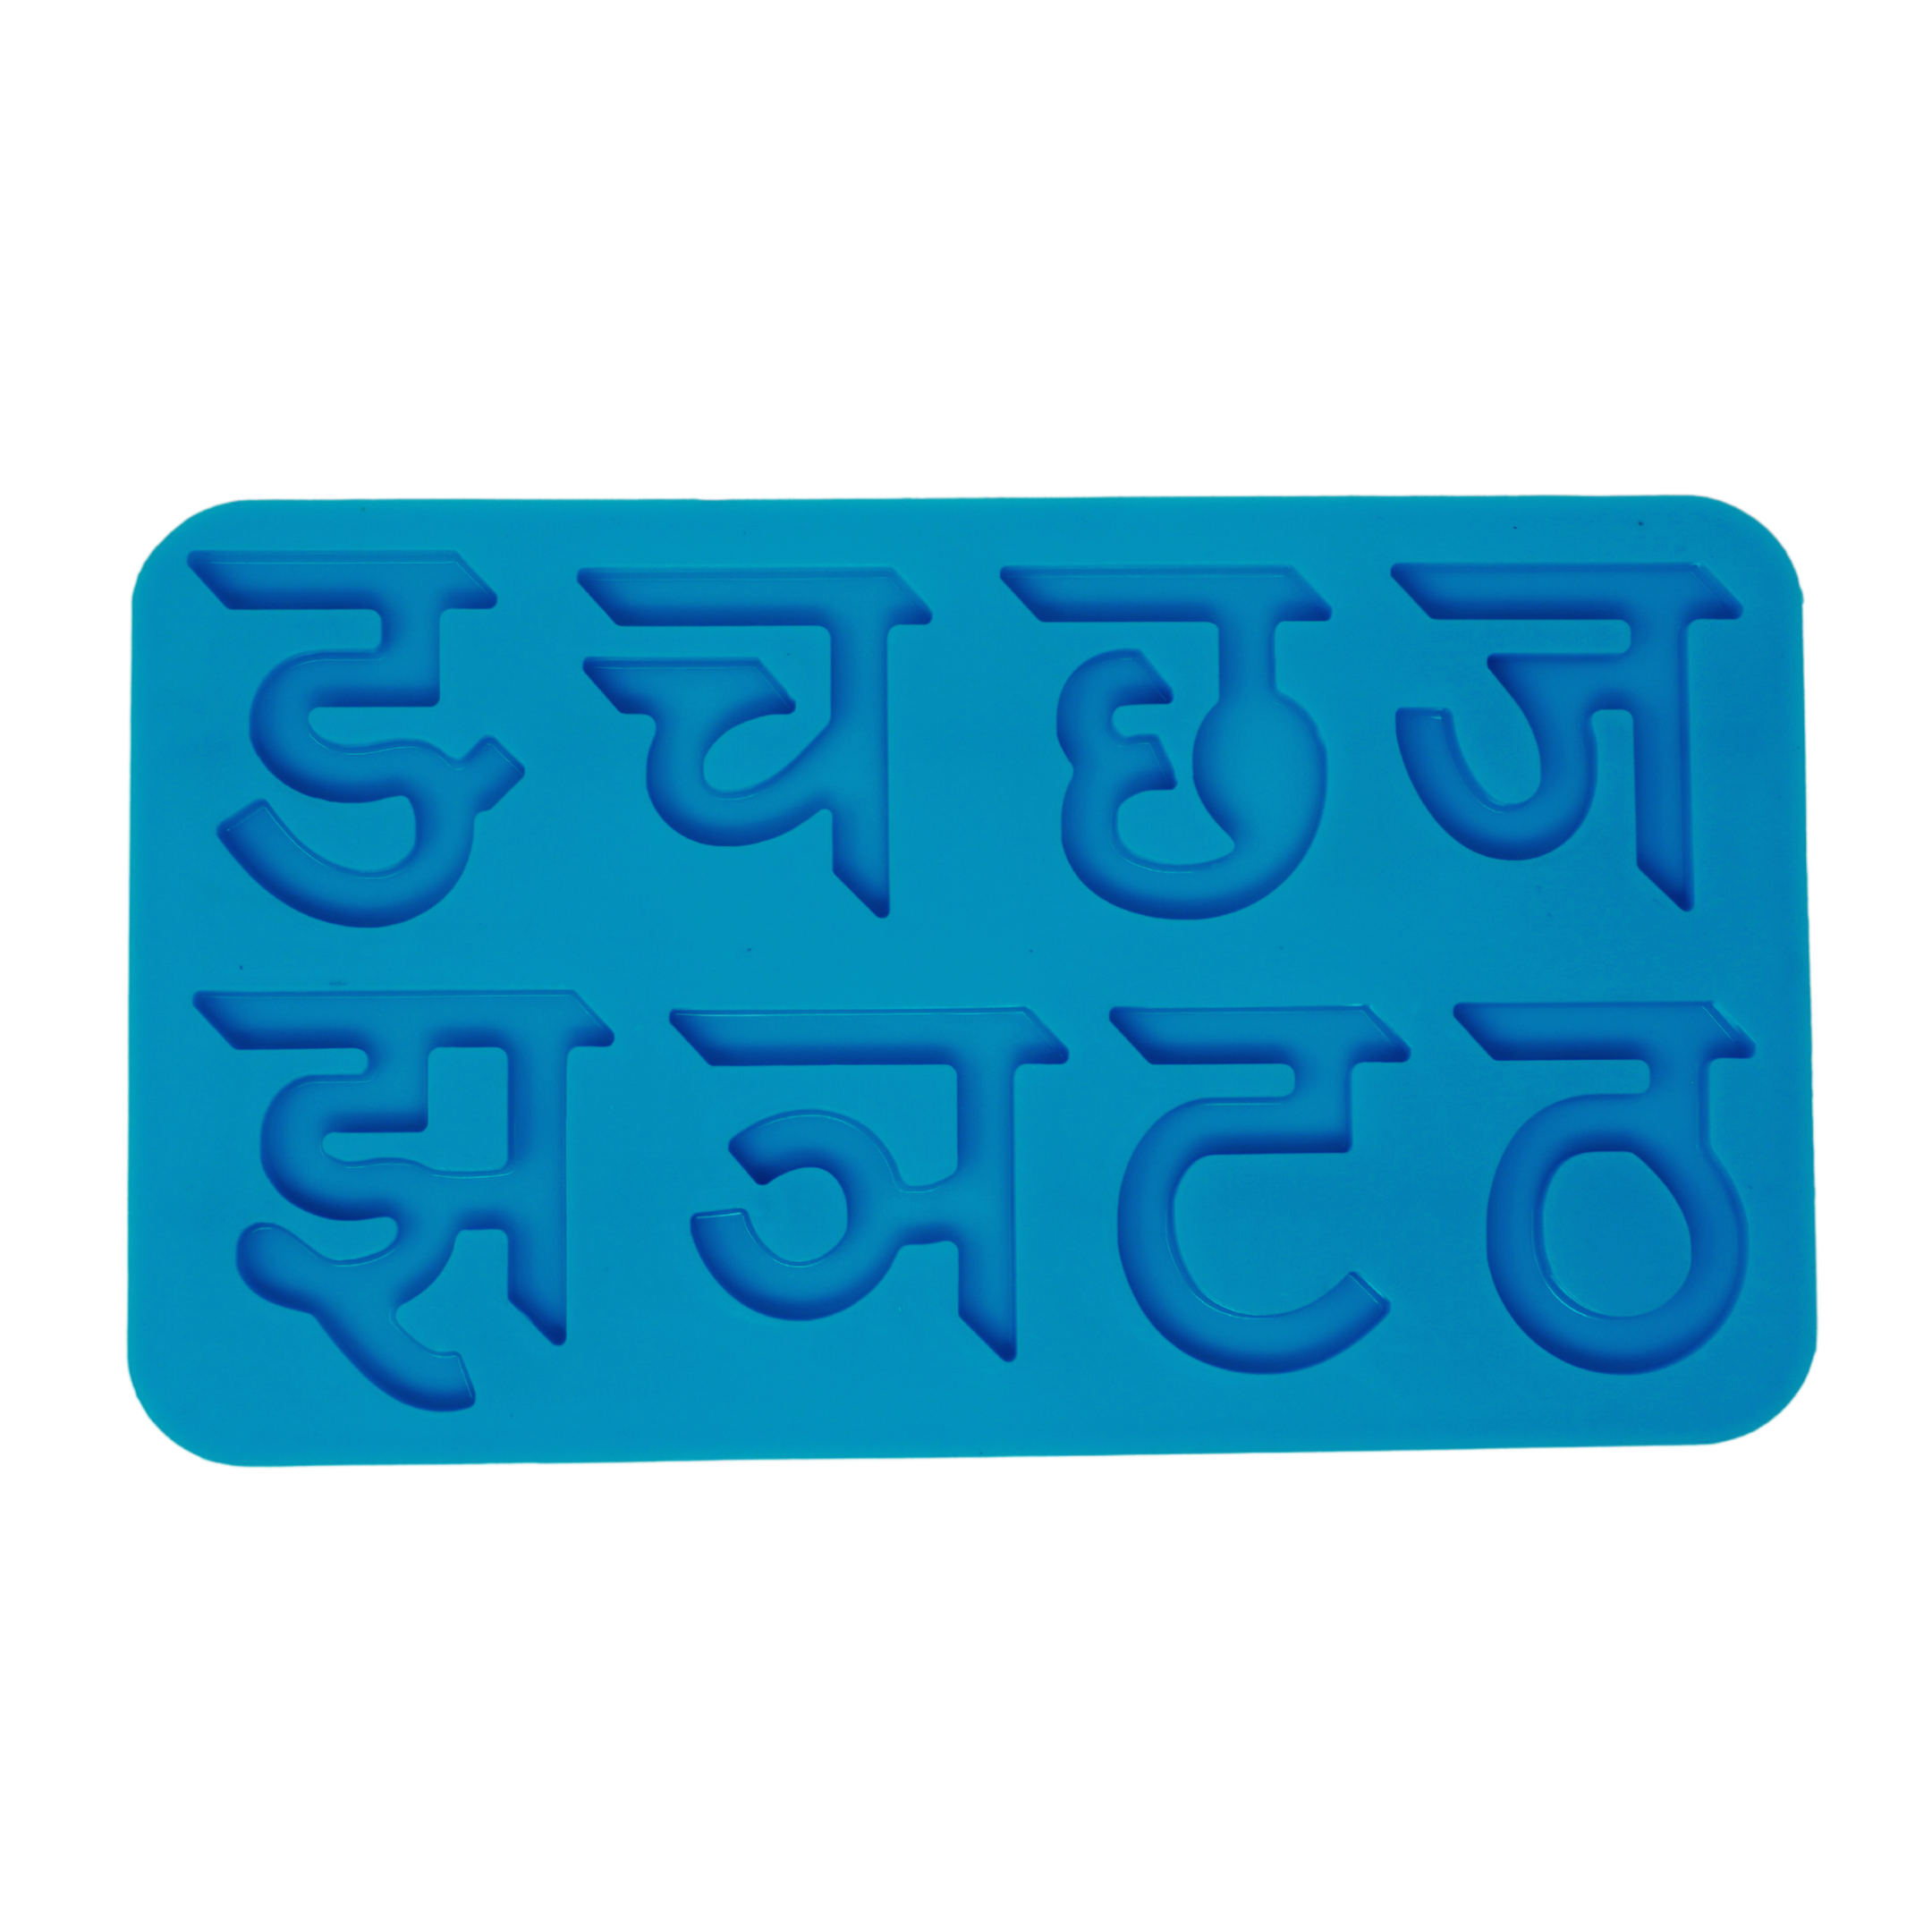 Hindi Alphabets Mould 3 - Tuh - The Mould Story